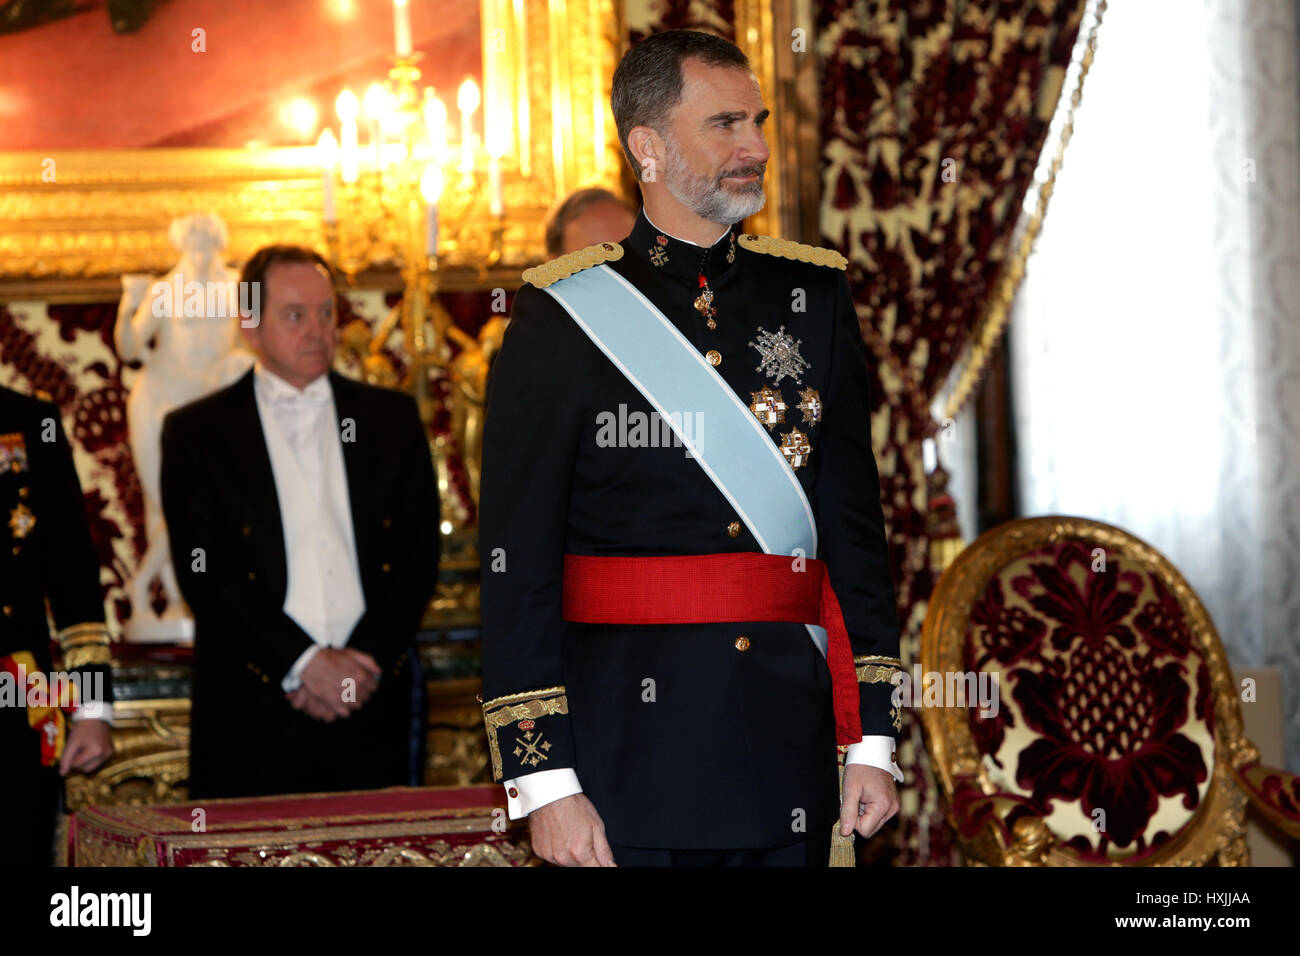 Madrid, Spain. 29th March 2017. King Felipe VI of Spain  receives the credentials of the ambassadors in RoyalPalace of Madrid.  29/03/2017 Credit: Gtres Información más Comuniación on line,S.L./Alamy Live News Stock Photo